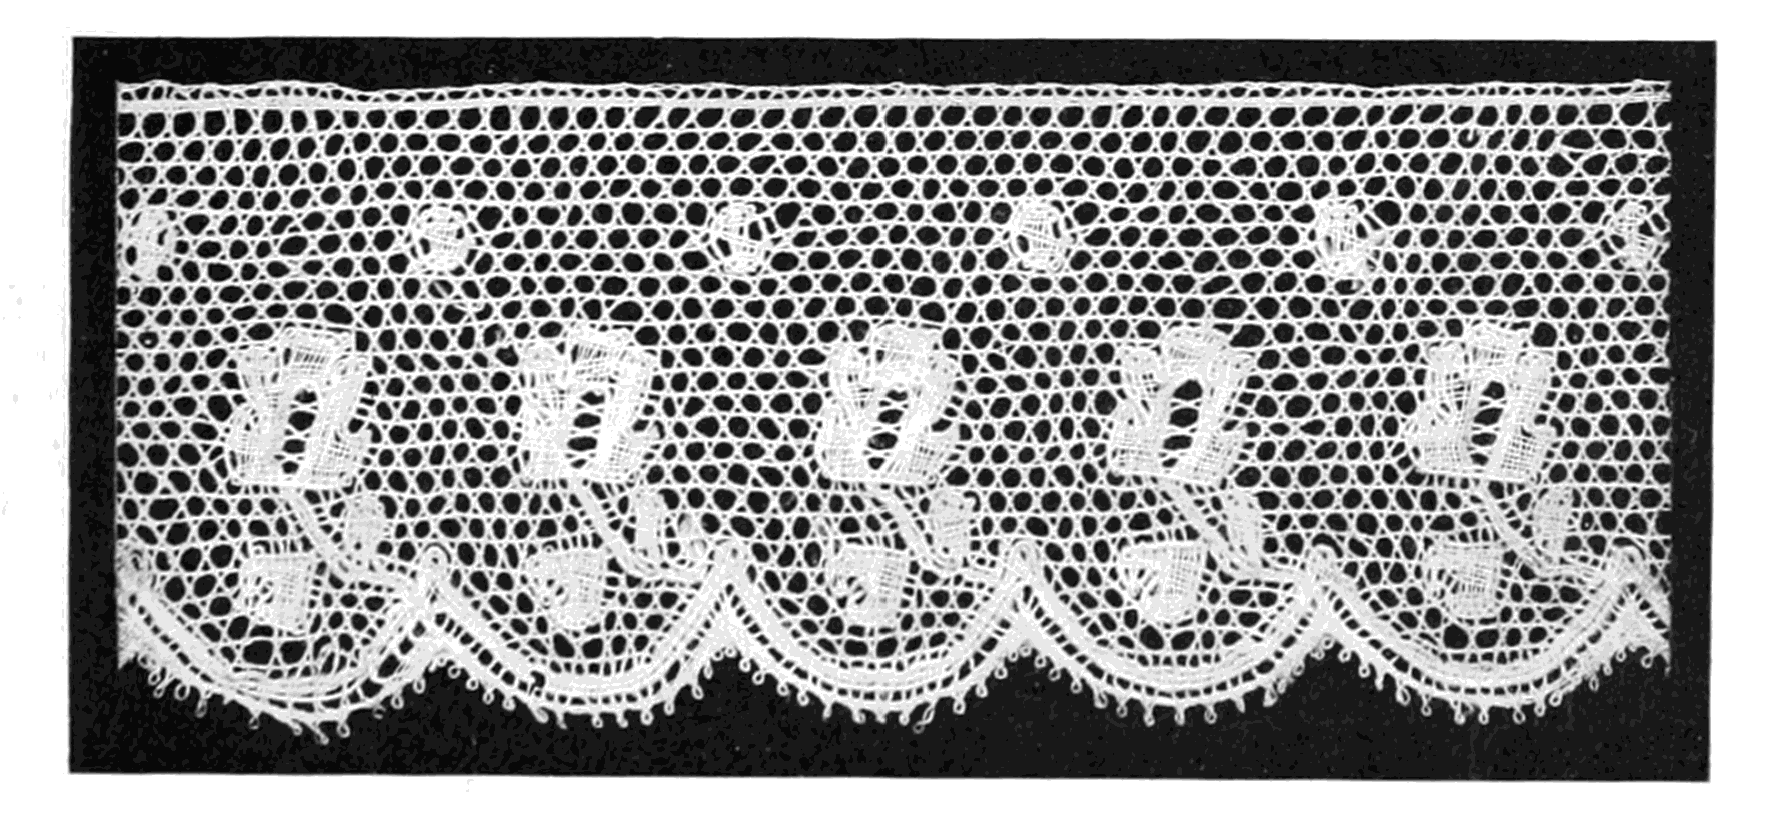 Tracing the History of Italian Lace